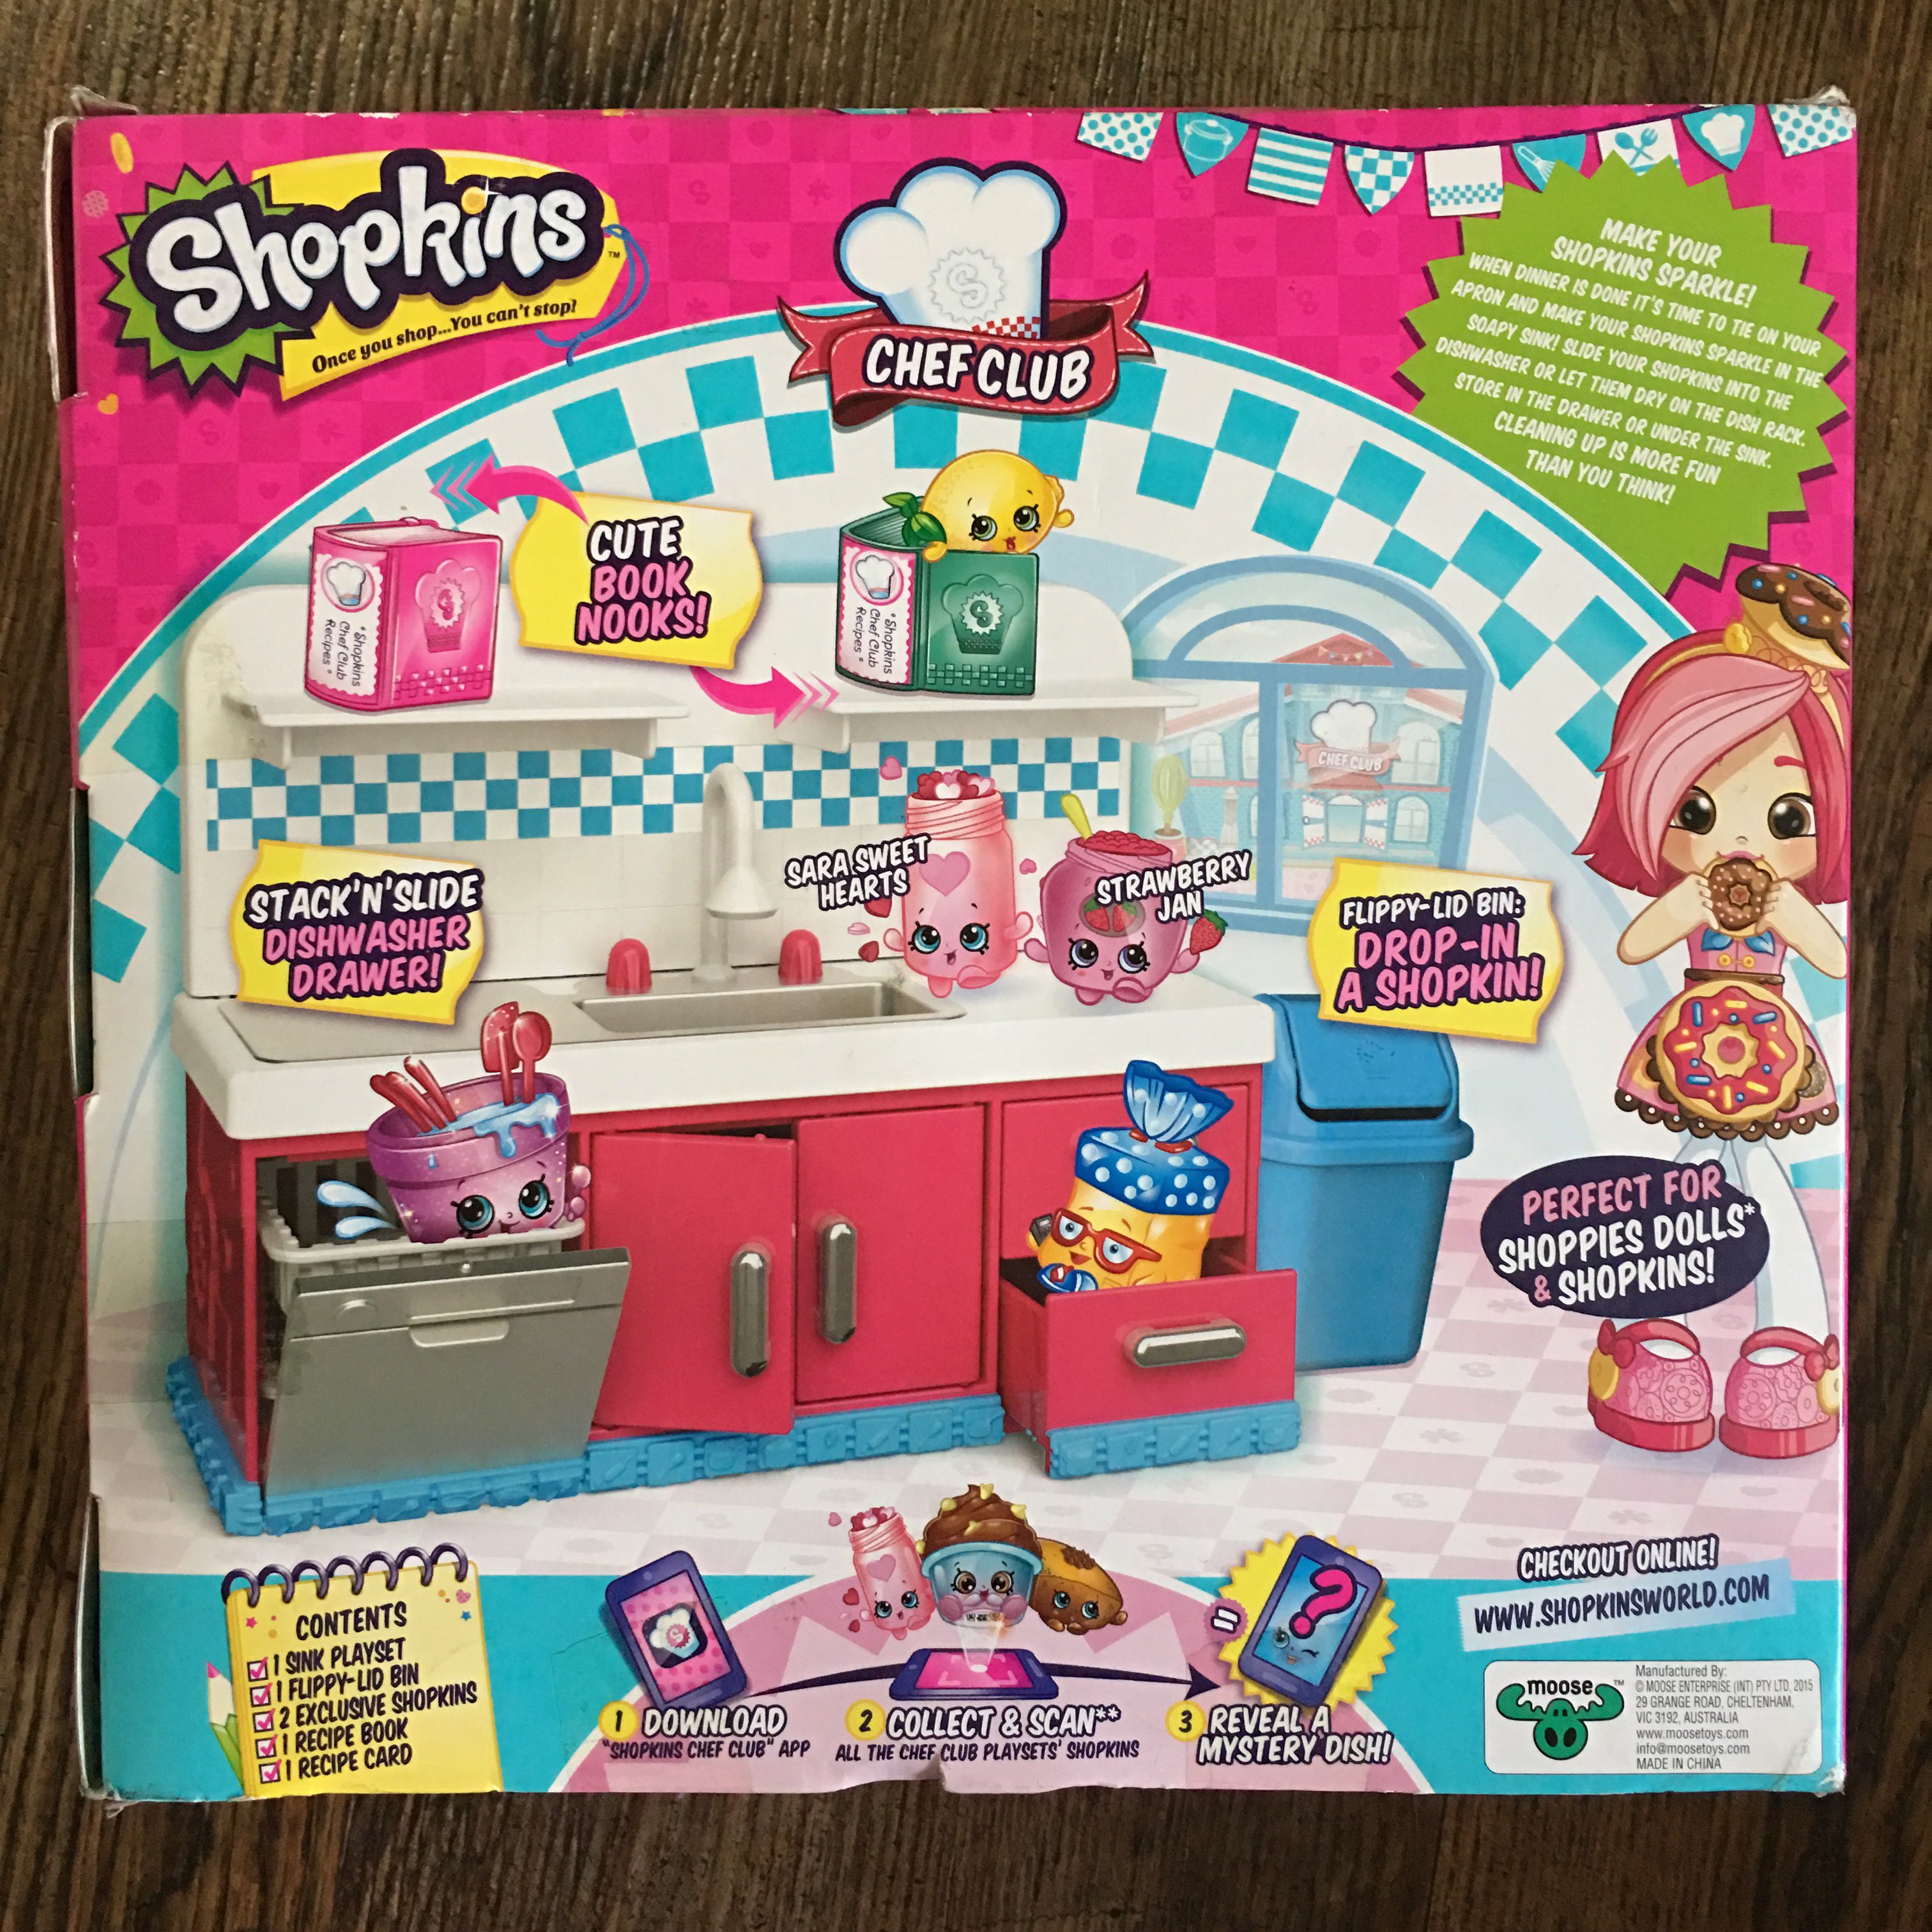 https://media.karousell.com/media/photos/products/2018/06/04/shopkins_chef_club_sparkle_clean_washer_1528091491_059892ec.jpg